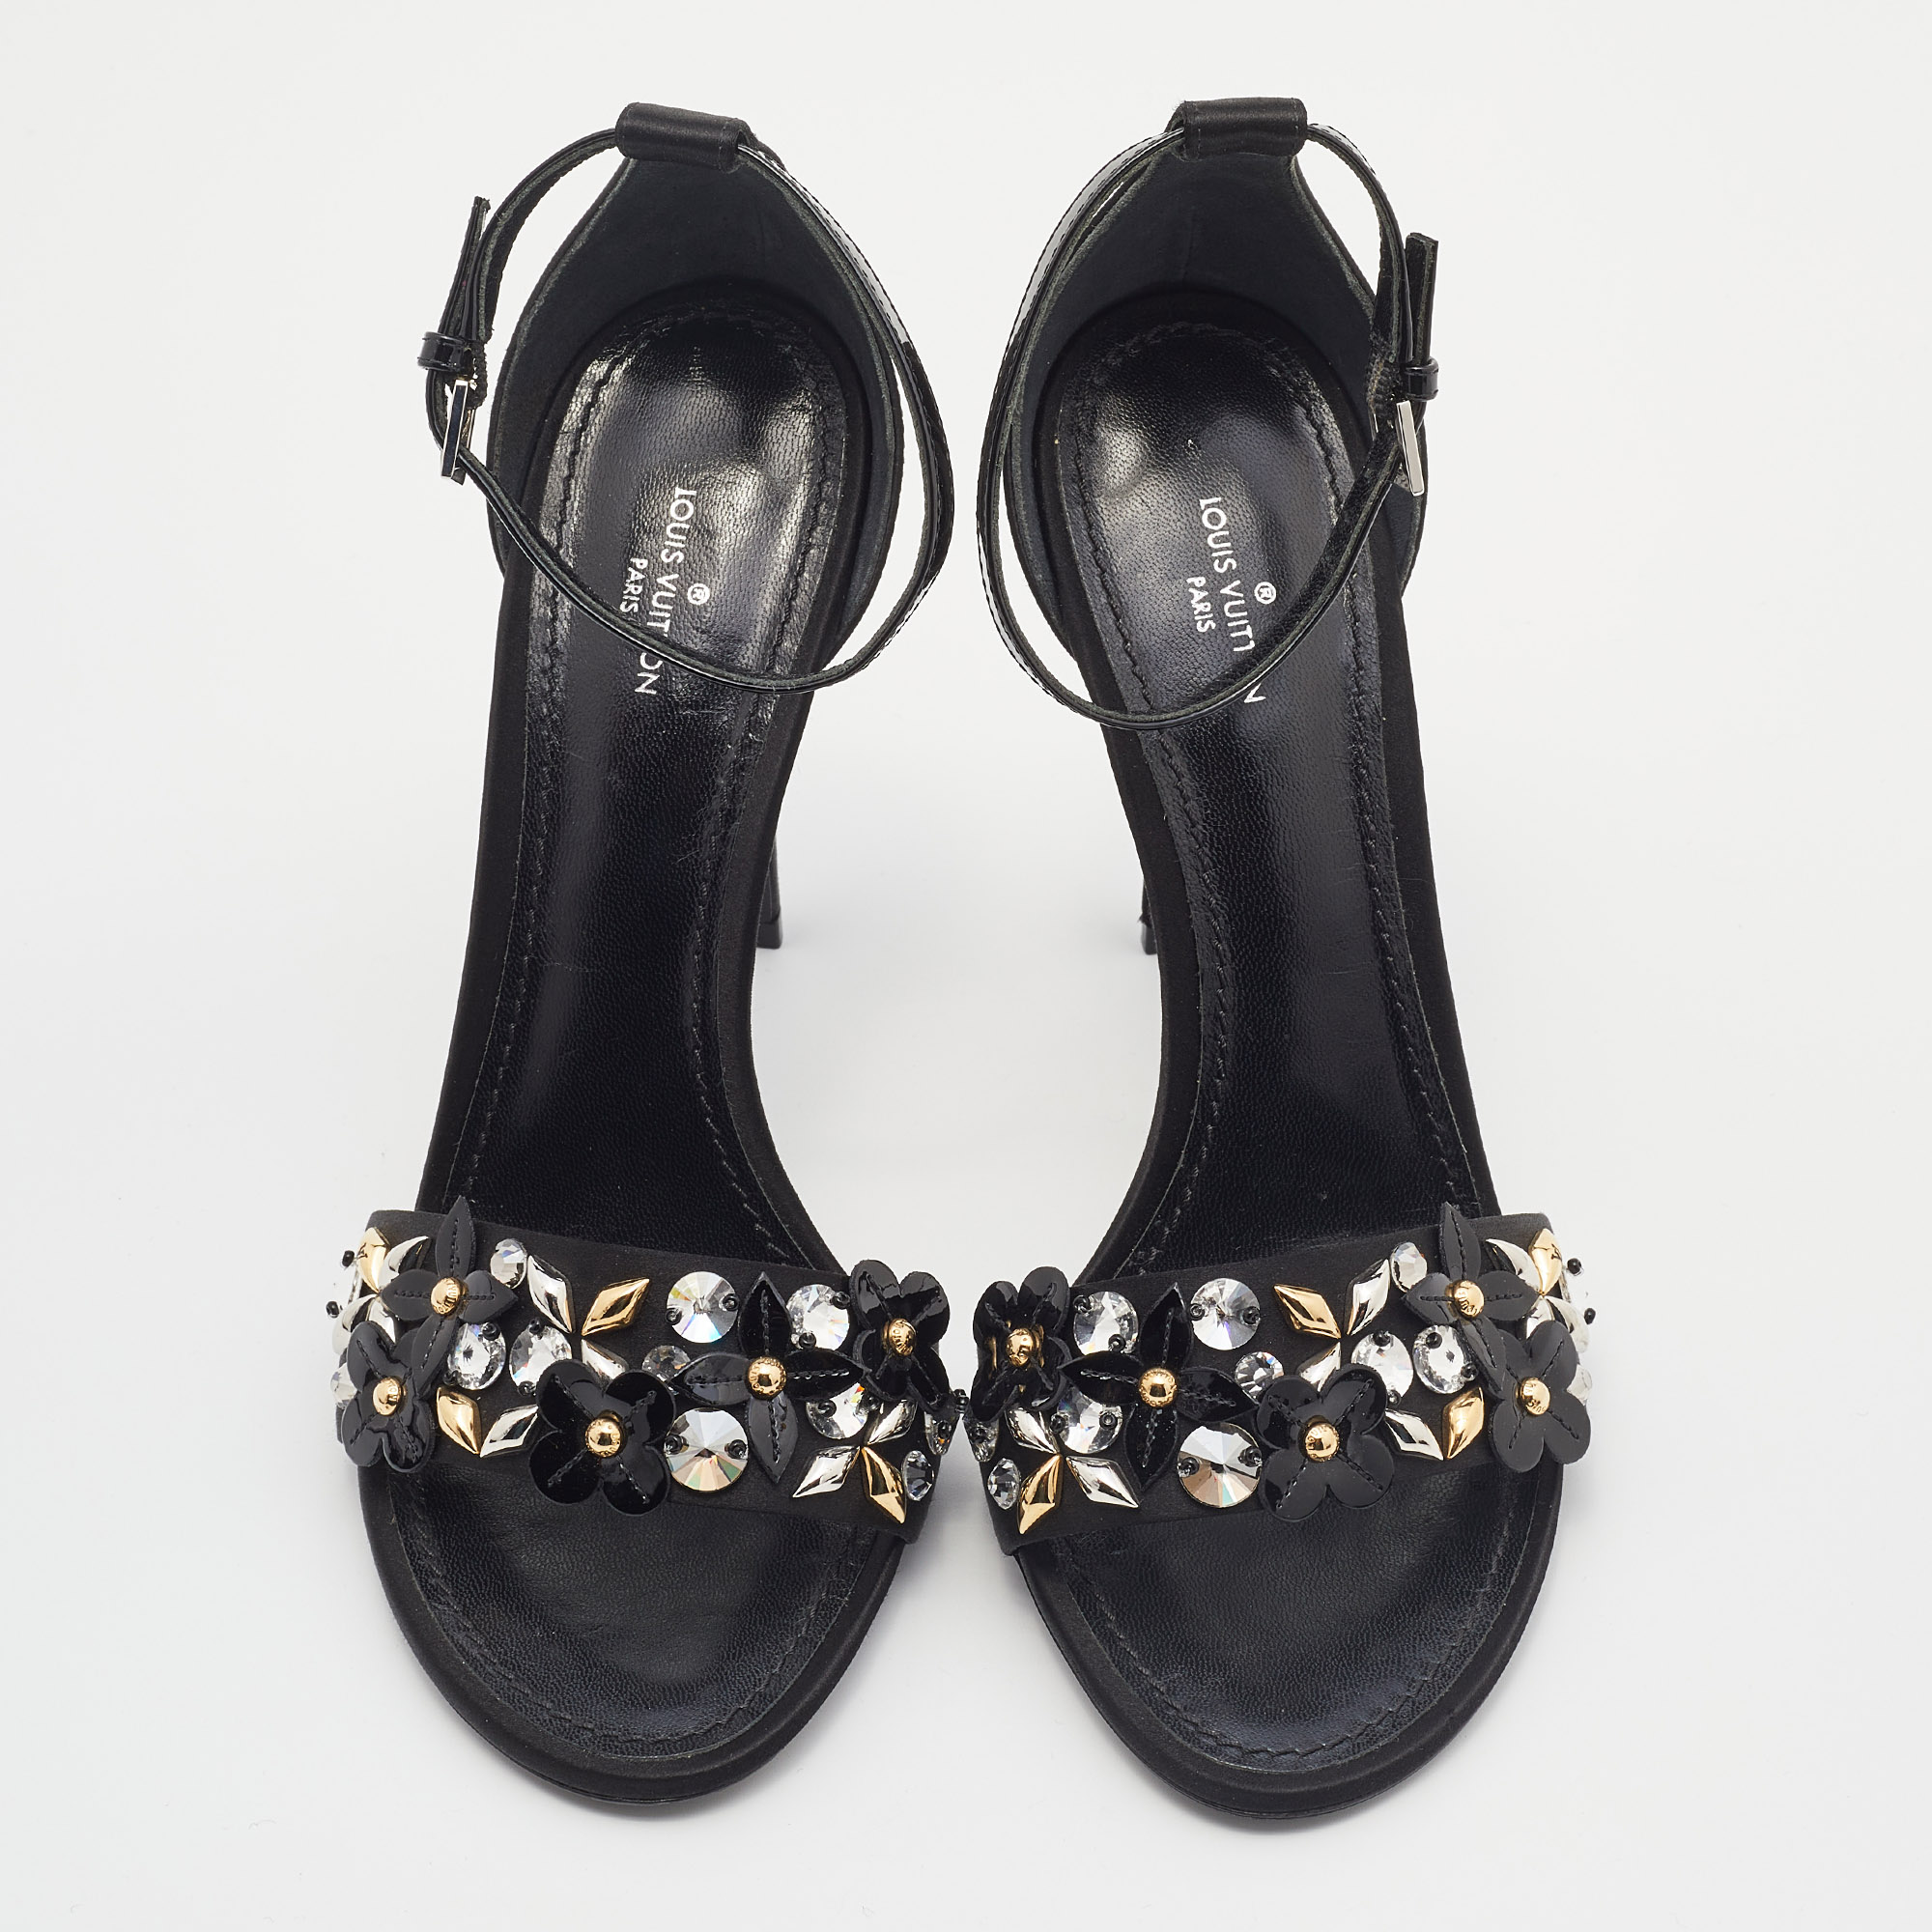 Louis Vuitton Black Satin And Patent Leather Embellished Ankle Strap Sandals Size 38.5